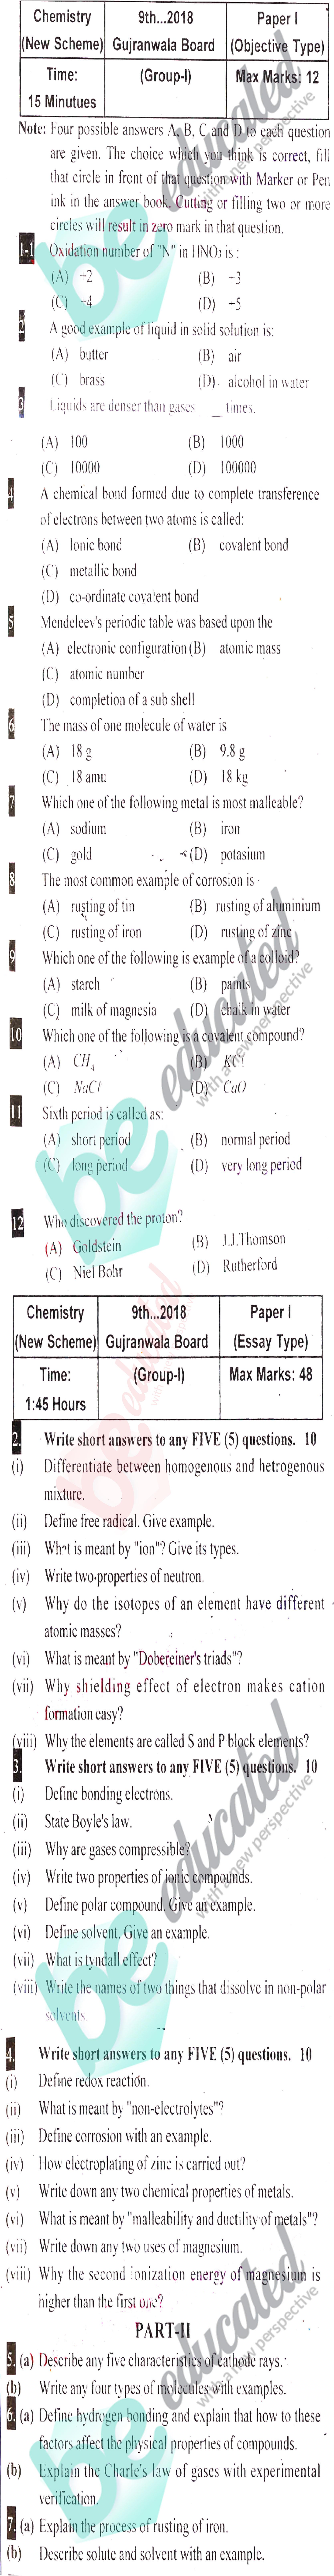 Chemistry 9th English Medium Past Paper Group 1 BISE Gujranwala 2018